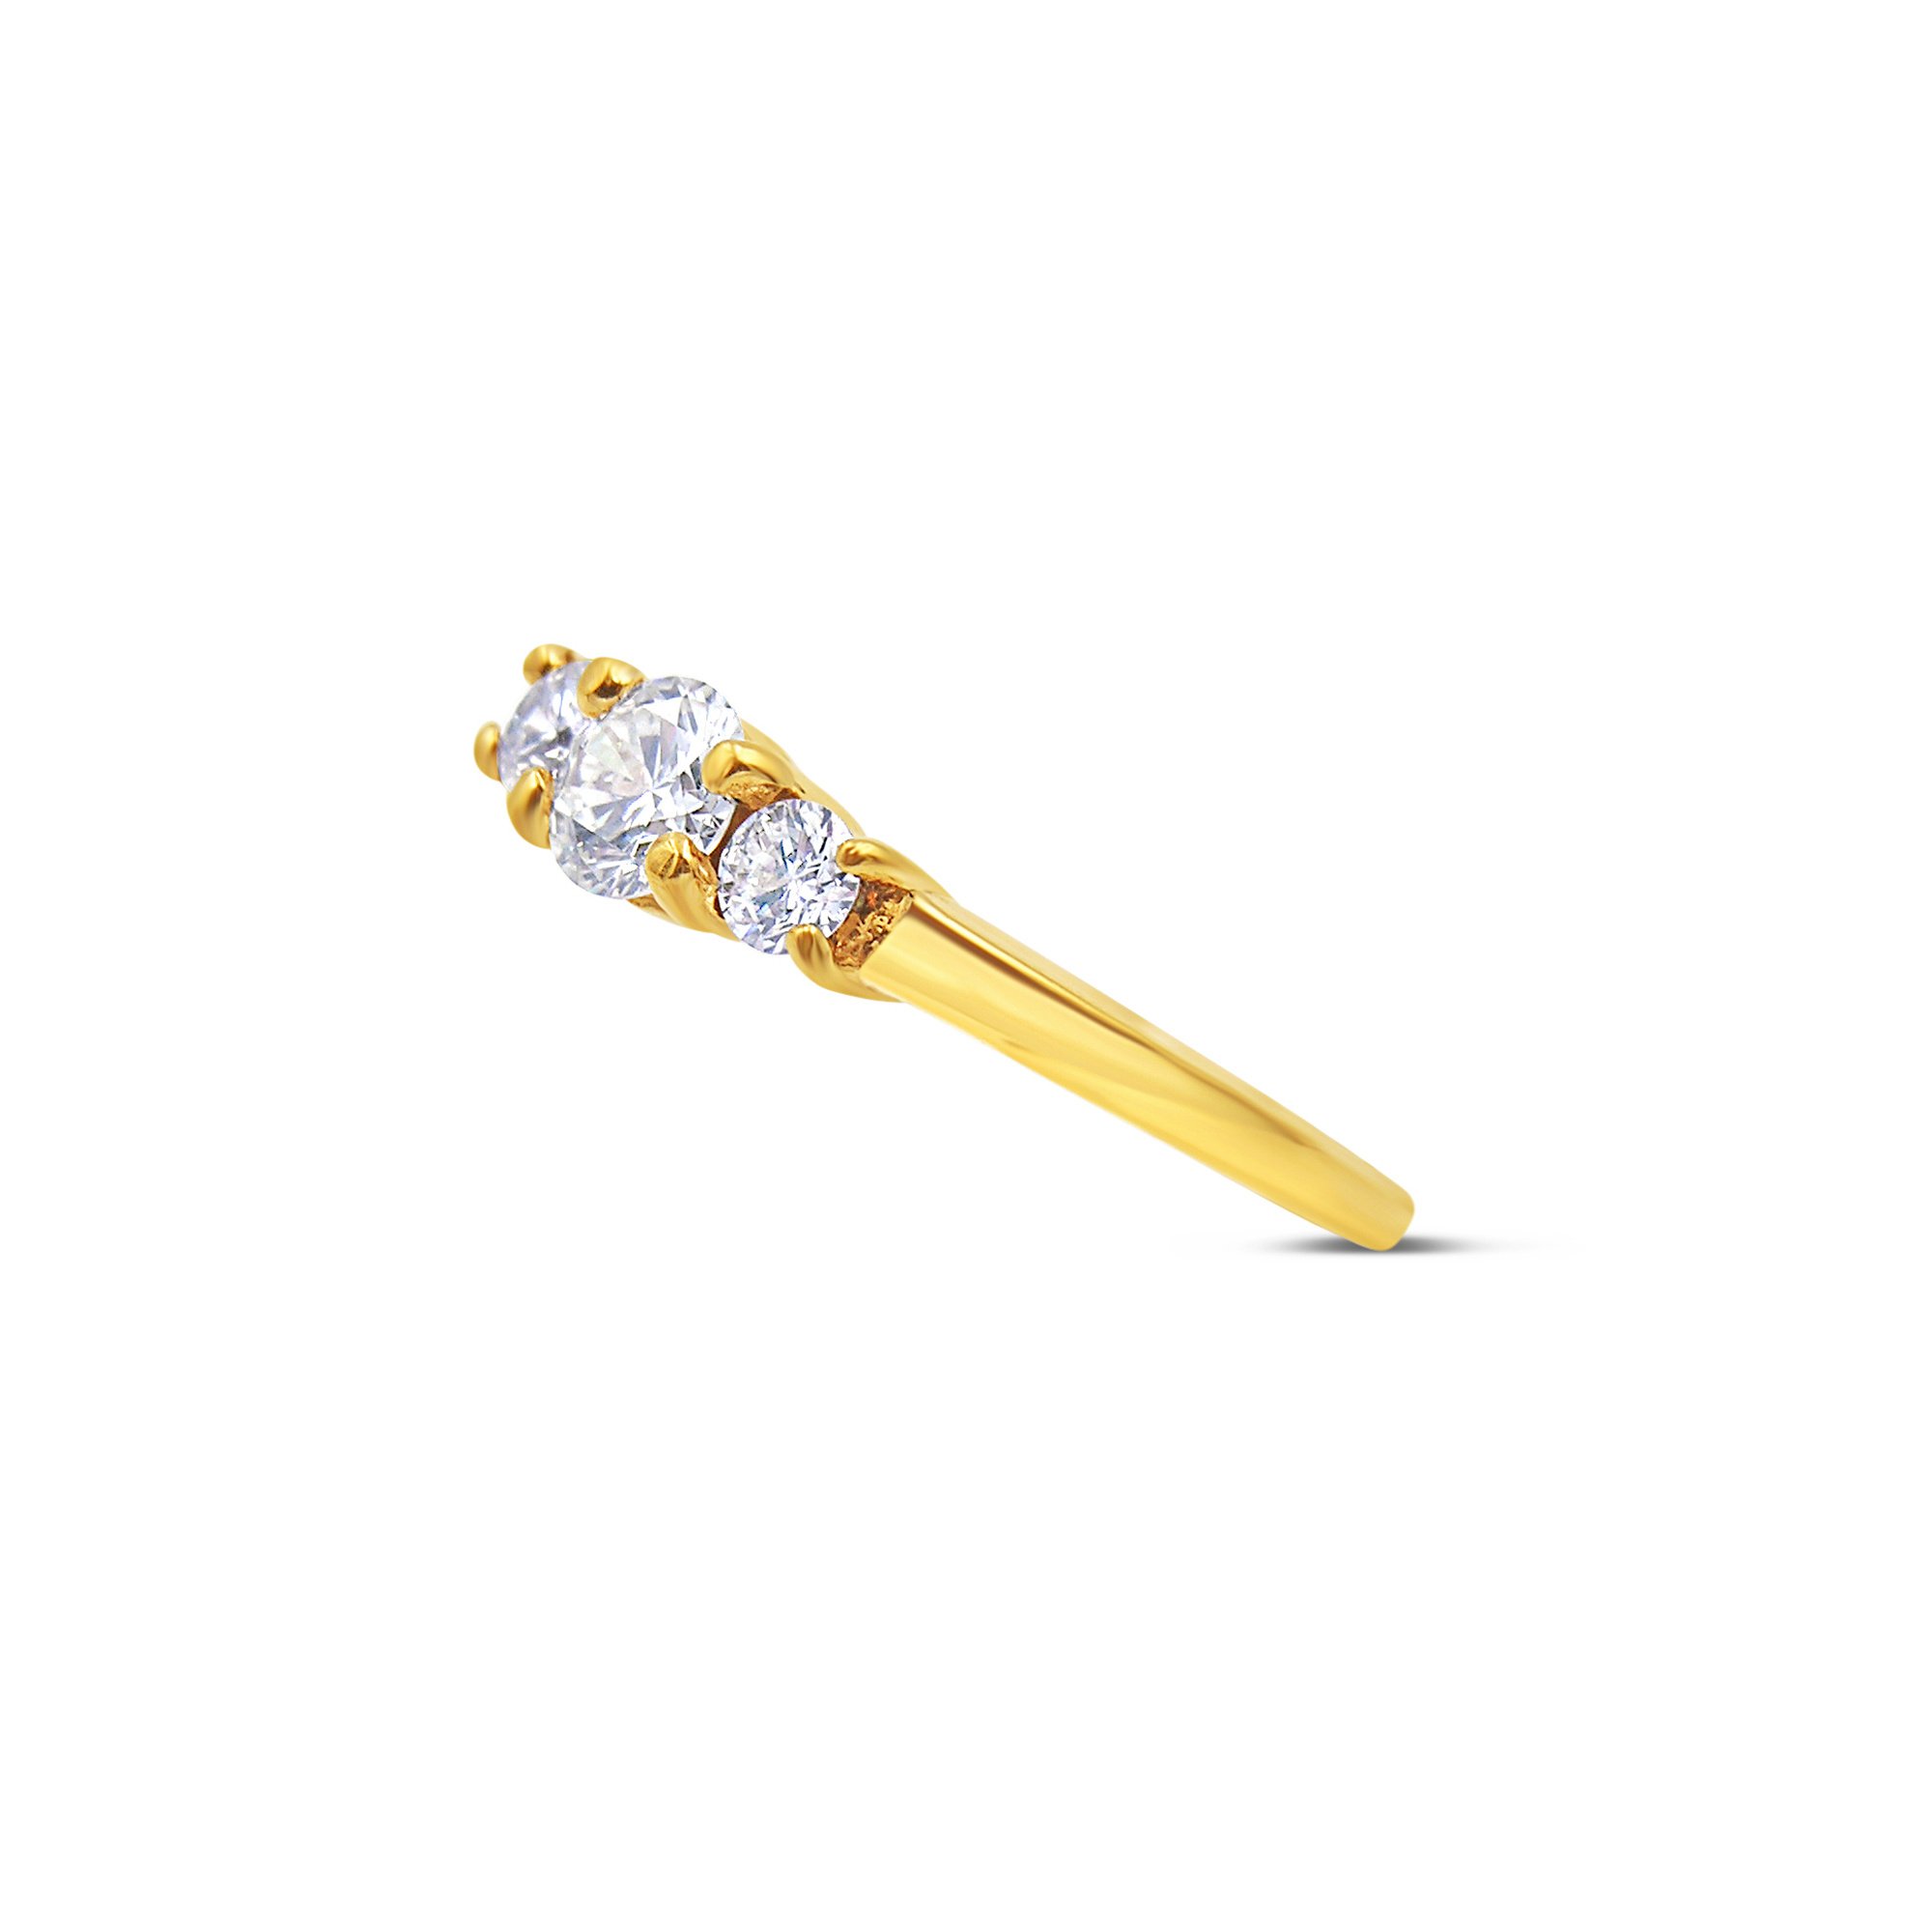 18kt yellow gold trilogy engagement ring with 0.64 ct diamonds